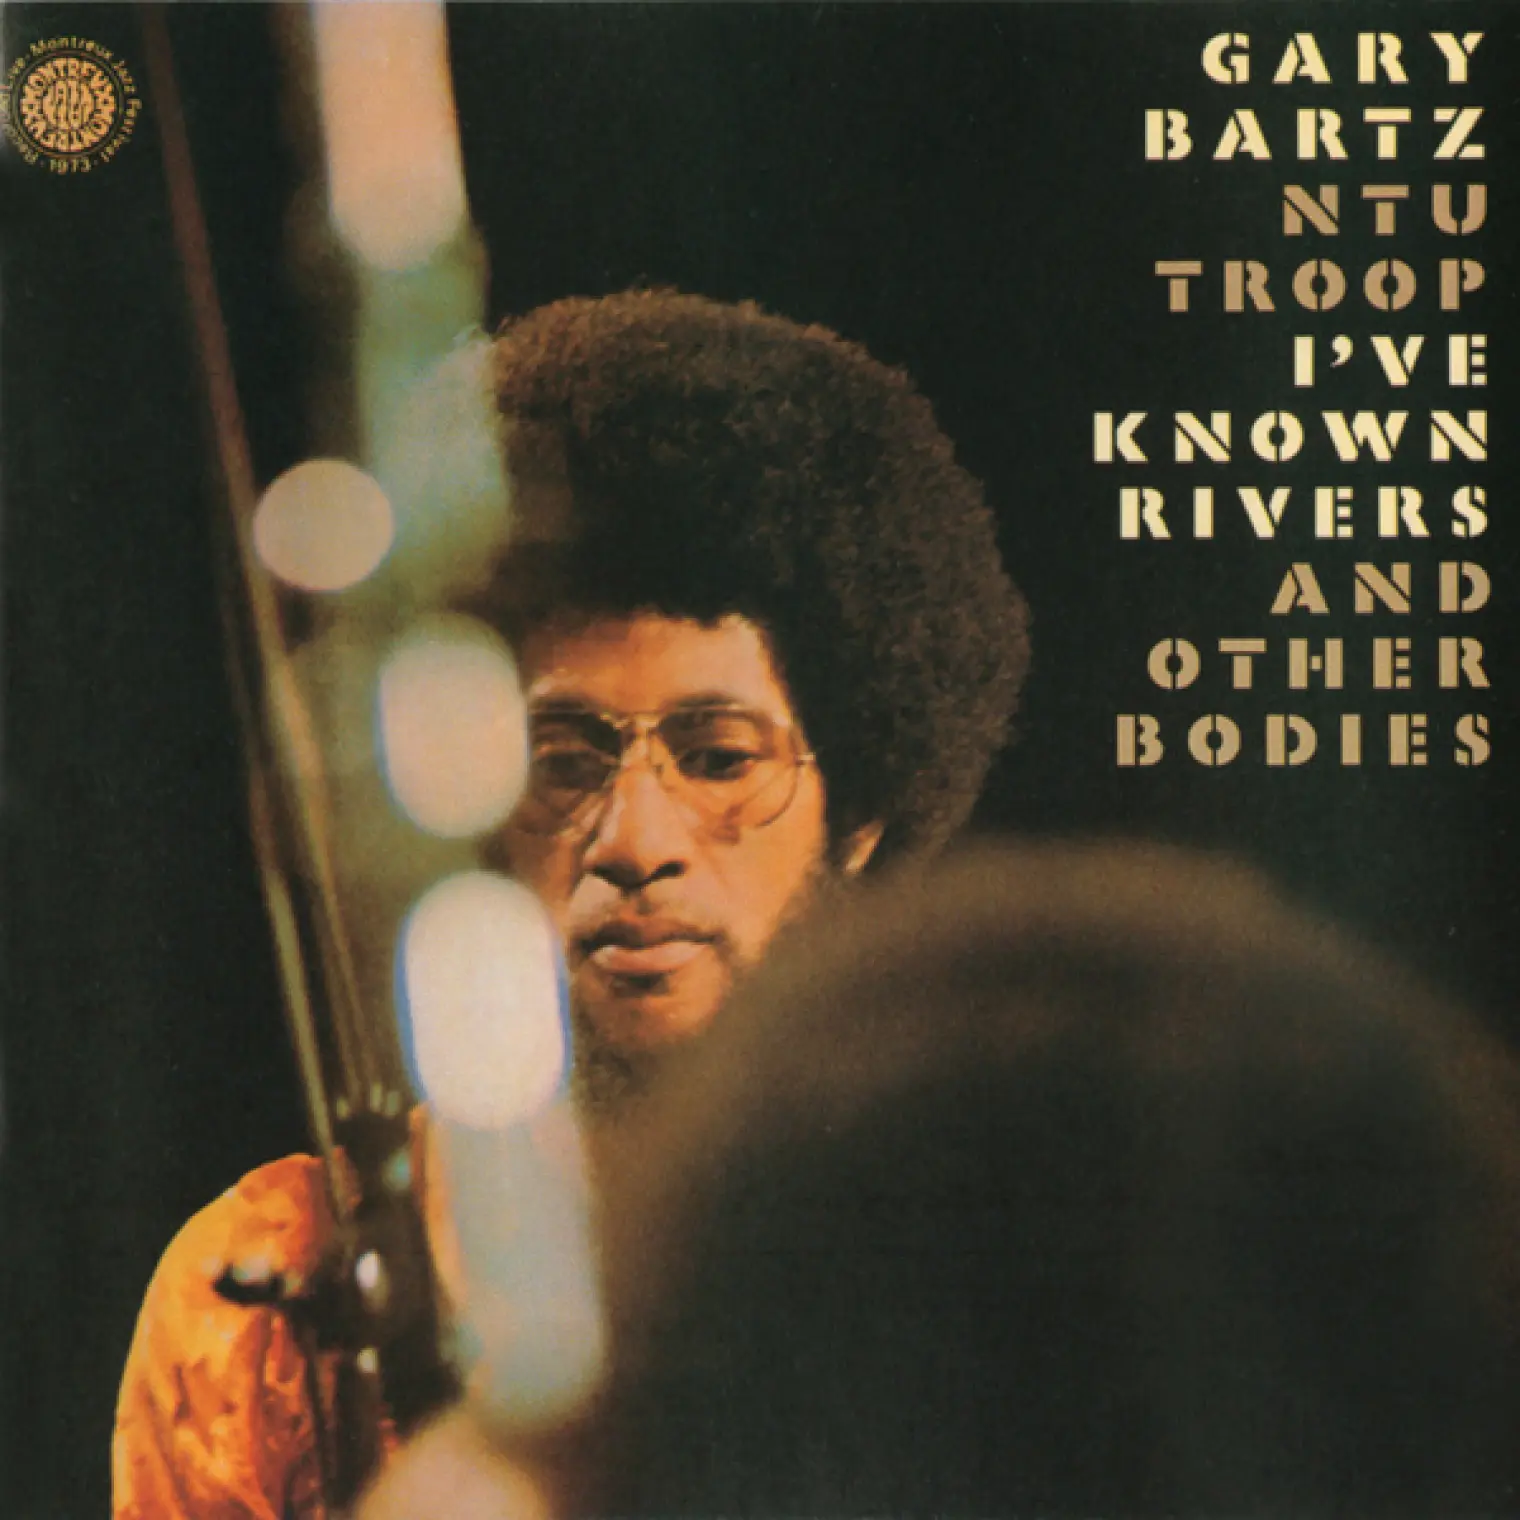 I've Known Rivers And Other Bodies -  Gary Bartz 